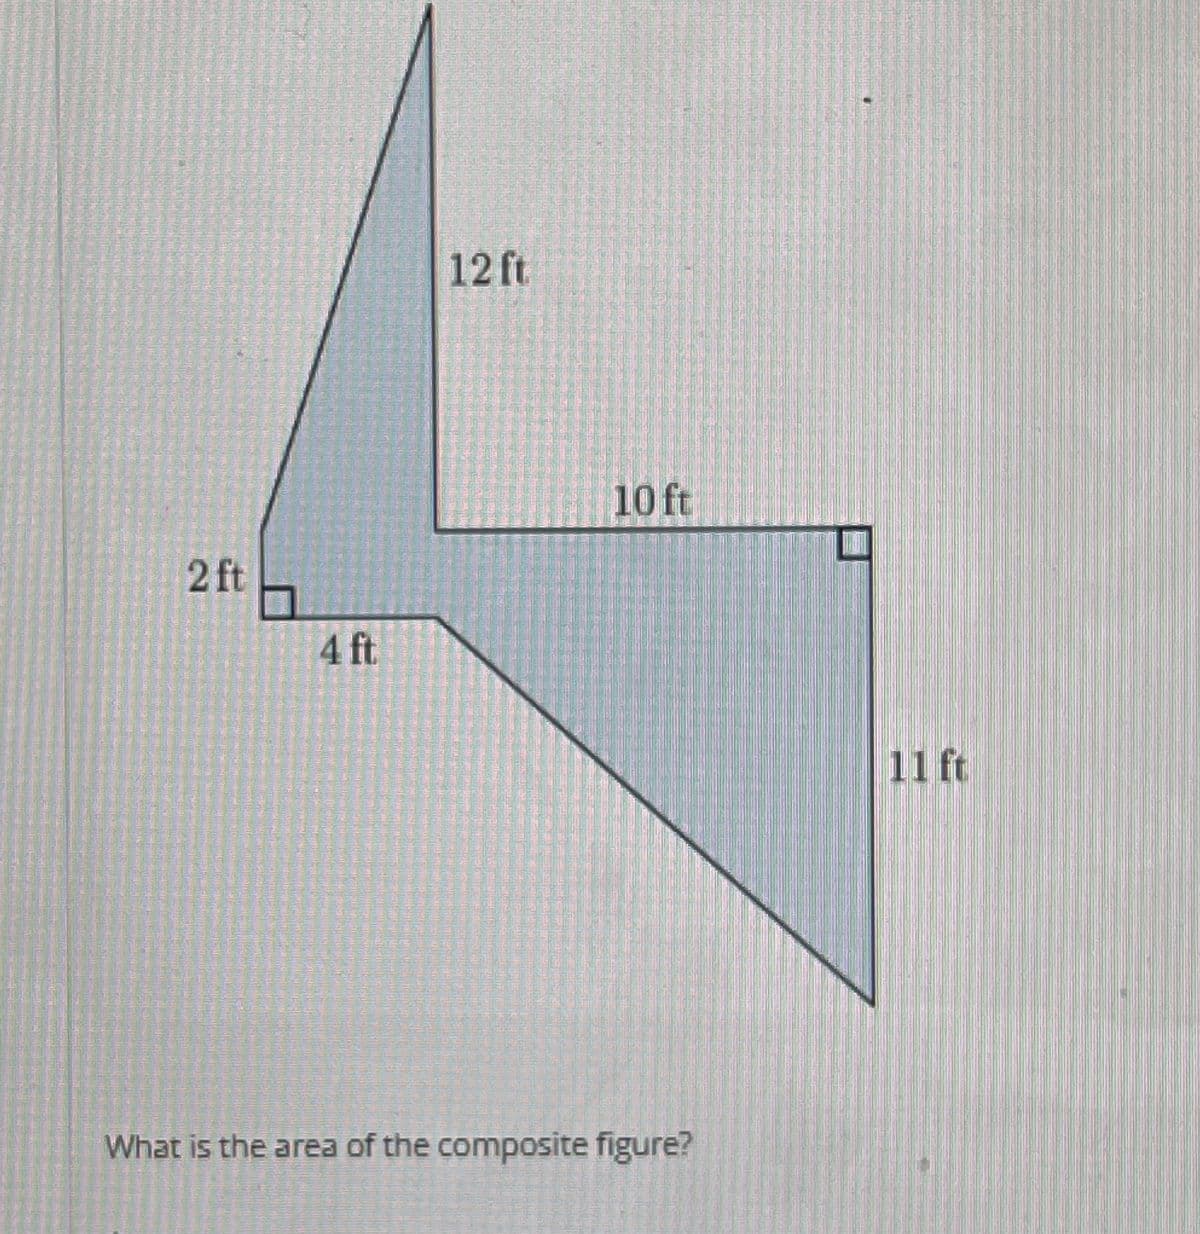 2 ft
4 ft
12 ft.
10 ft
What is the area of the composite figure?
11 ft